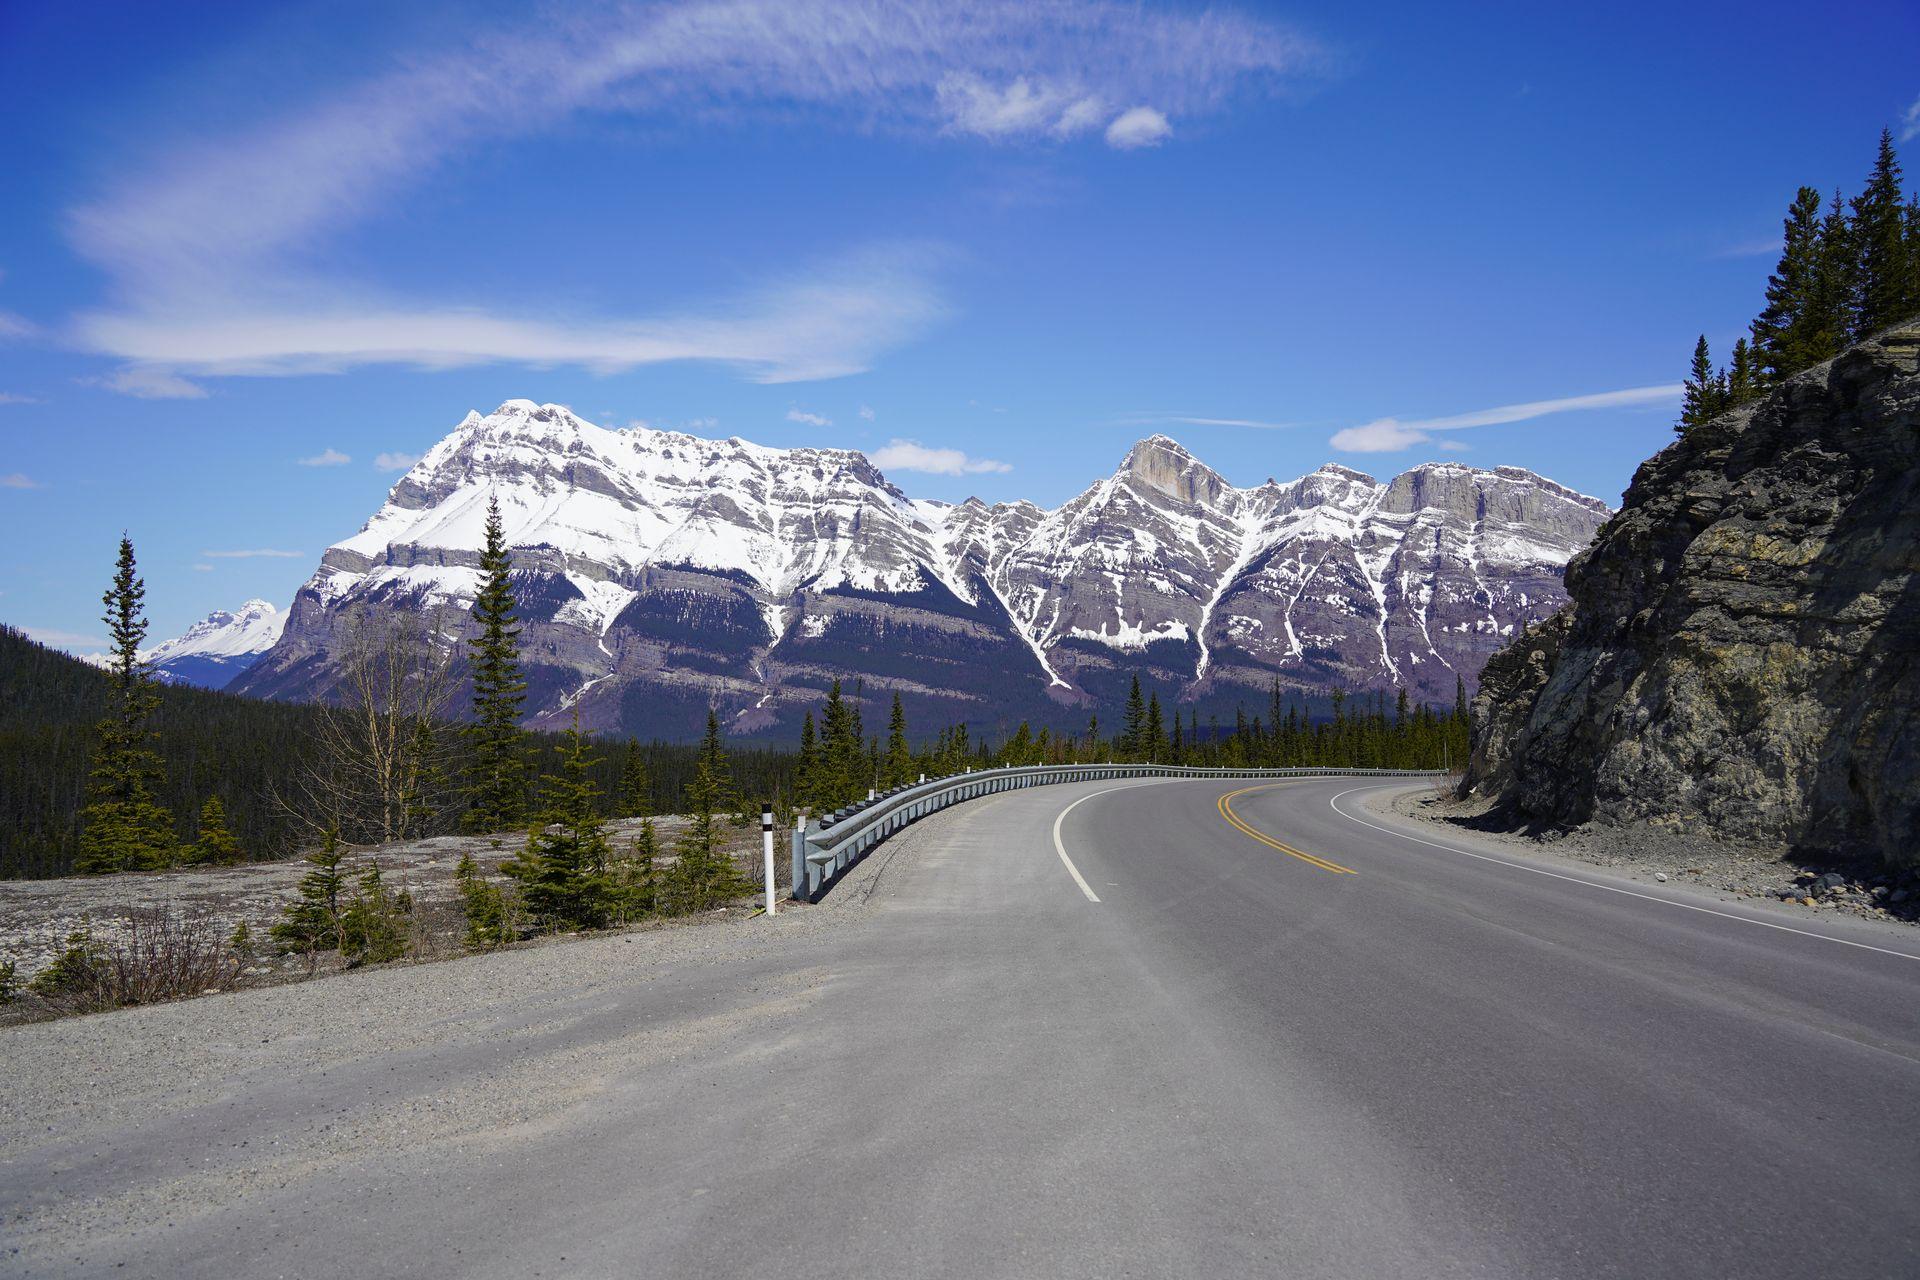 Large, towering mountains seen along The Icefields Parkway.